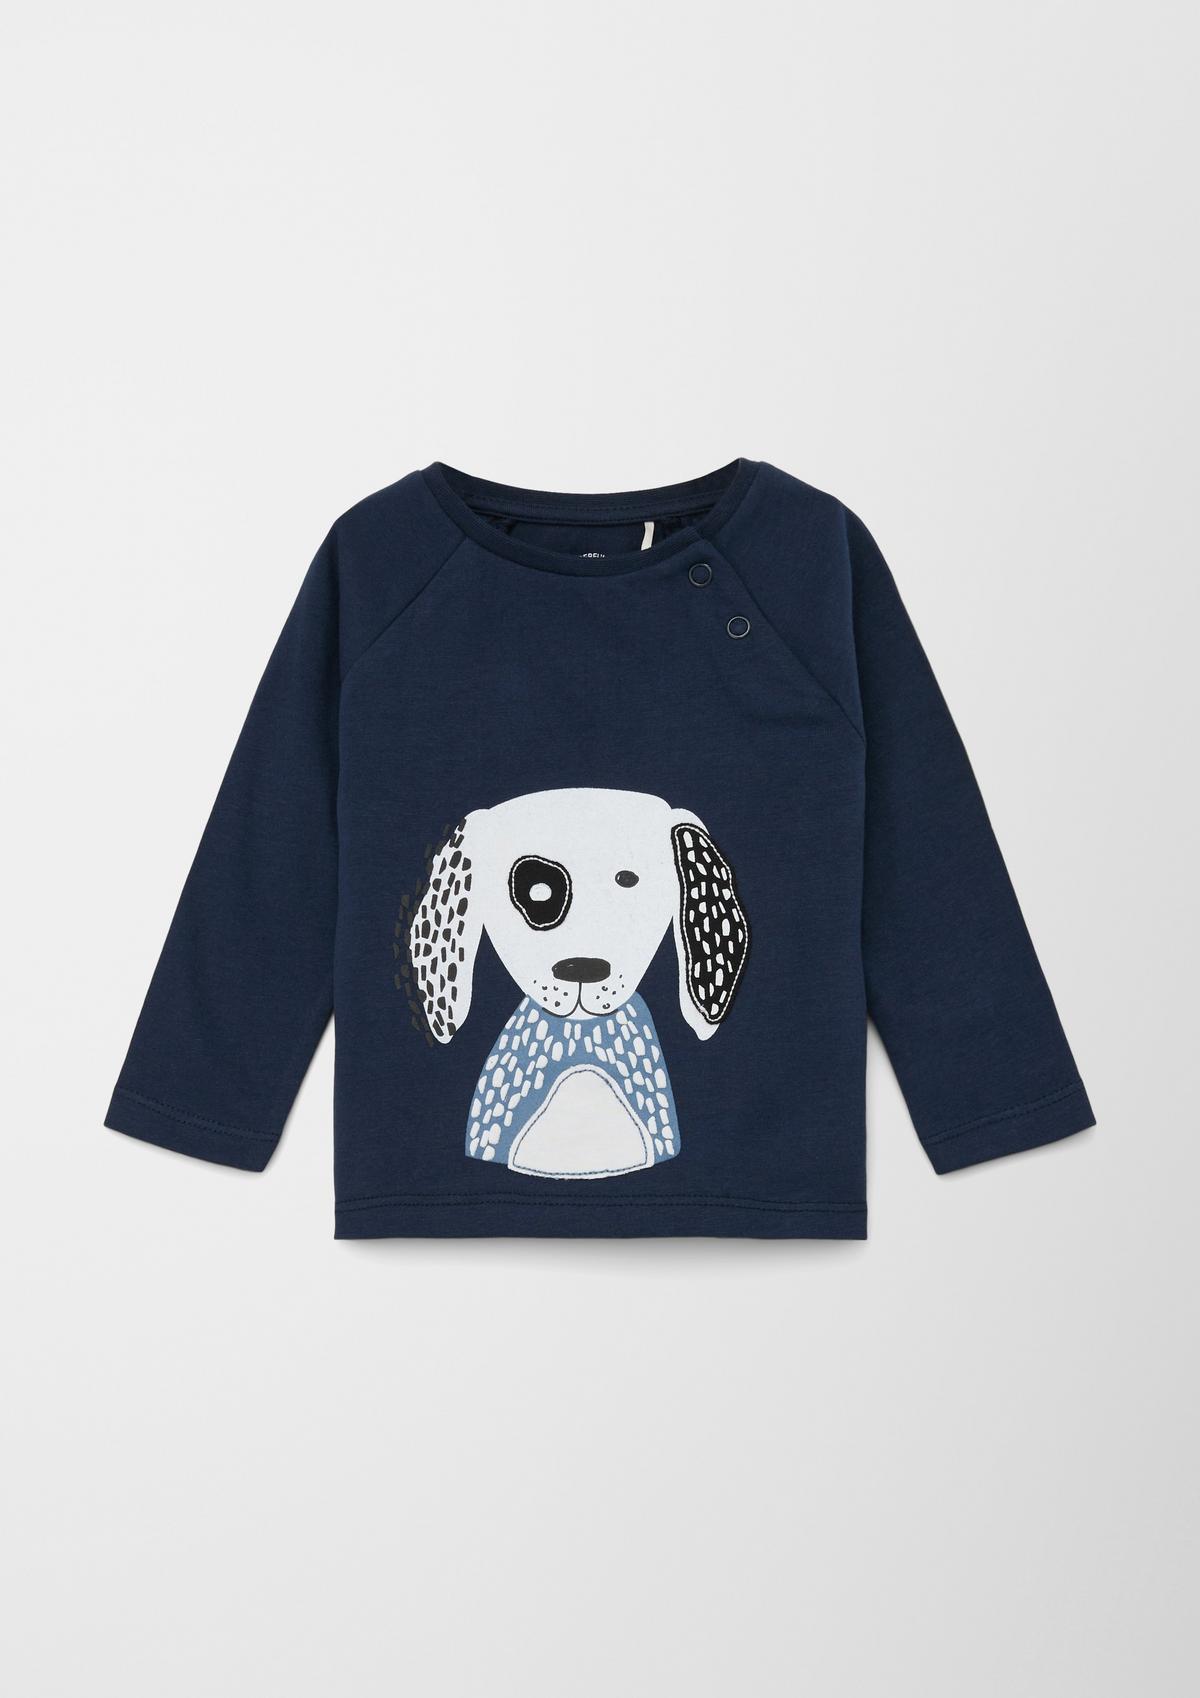 s.Oliver Long sleeve top with a cute dog motif